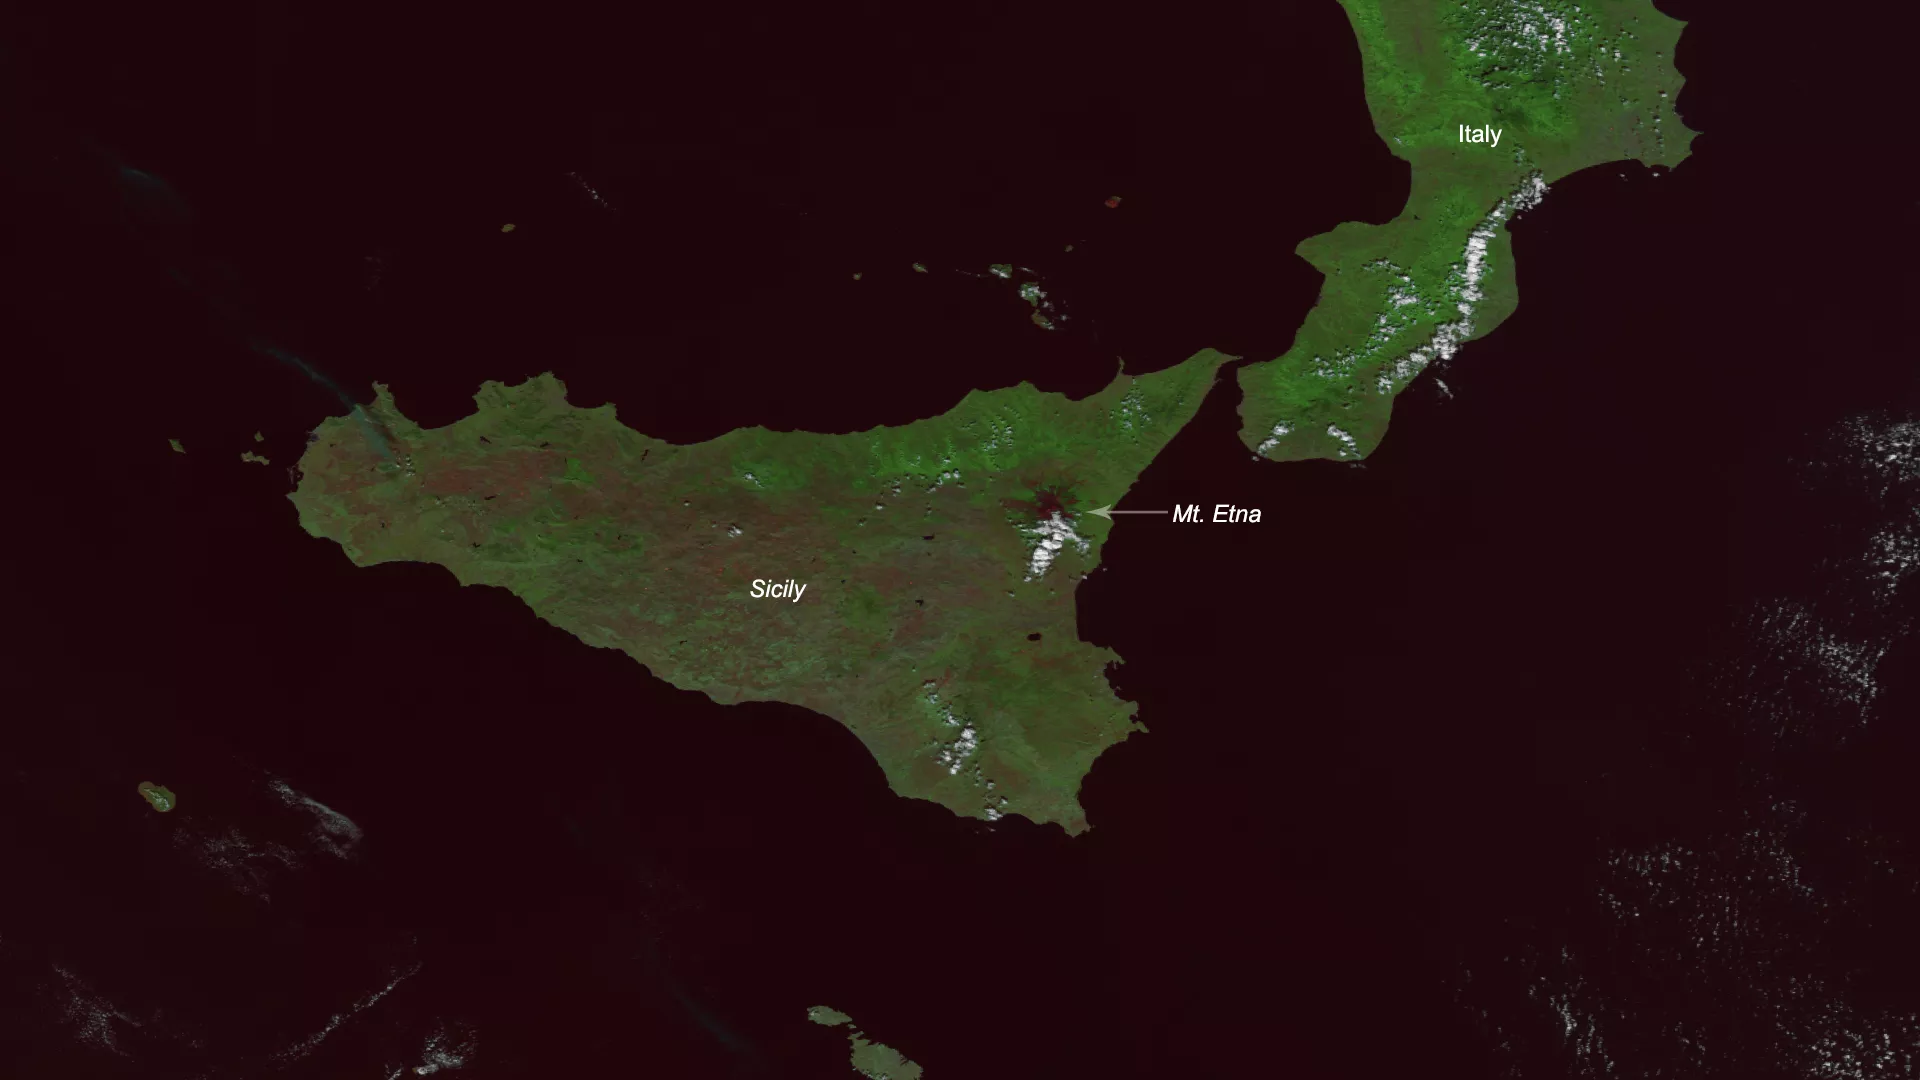 Imagery of Sicily and Mt. Etna's strombolian eruptions, Sept. 2019 via the NOAA-20.